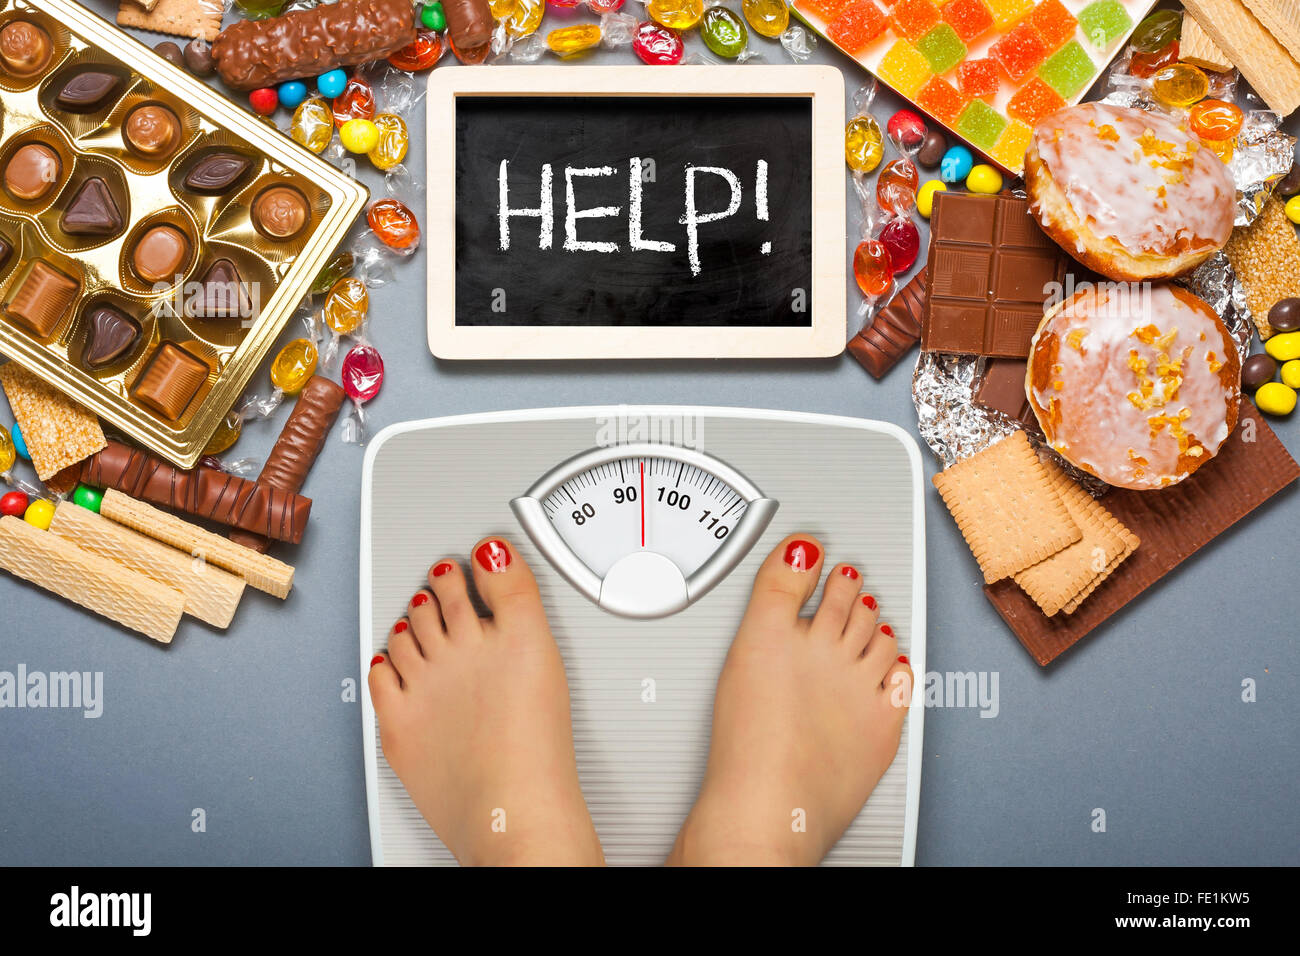 Unhealthy diet - overweight. Feet on bathroom scale and chocolate, jelly cubes, candies, chocolate bars, cookies, donuts Stock Photo